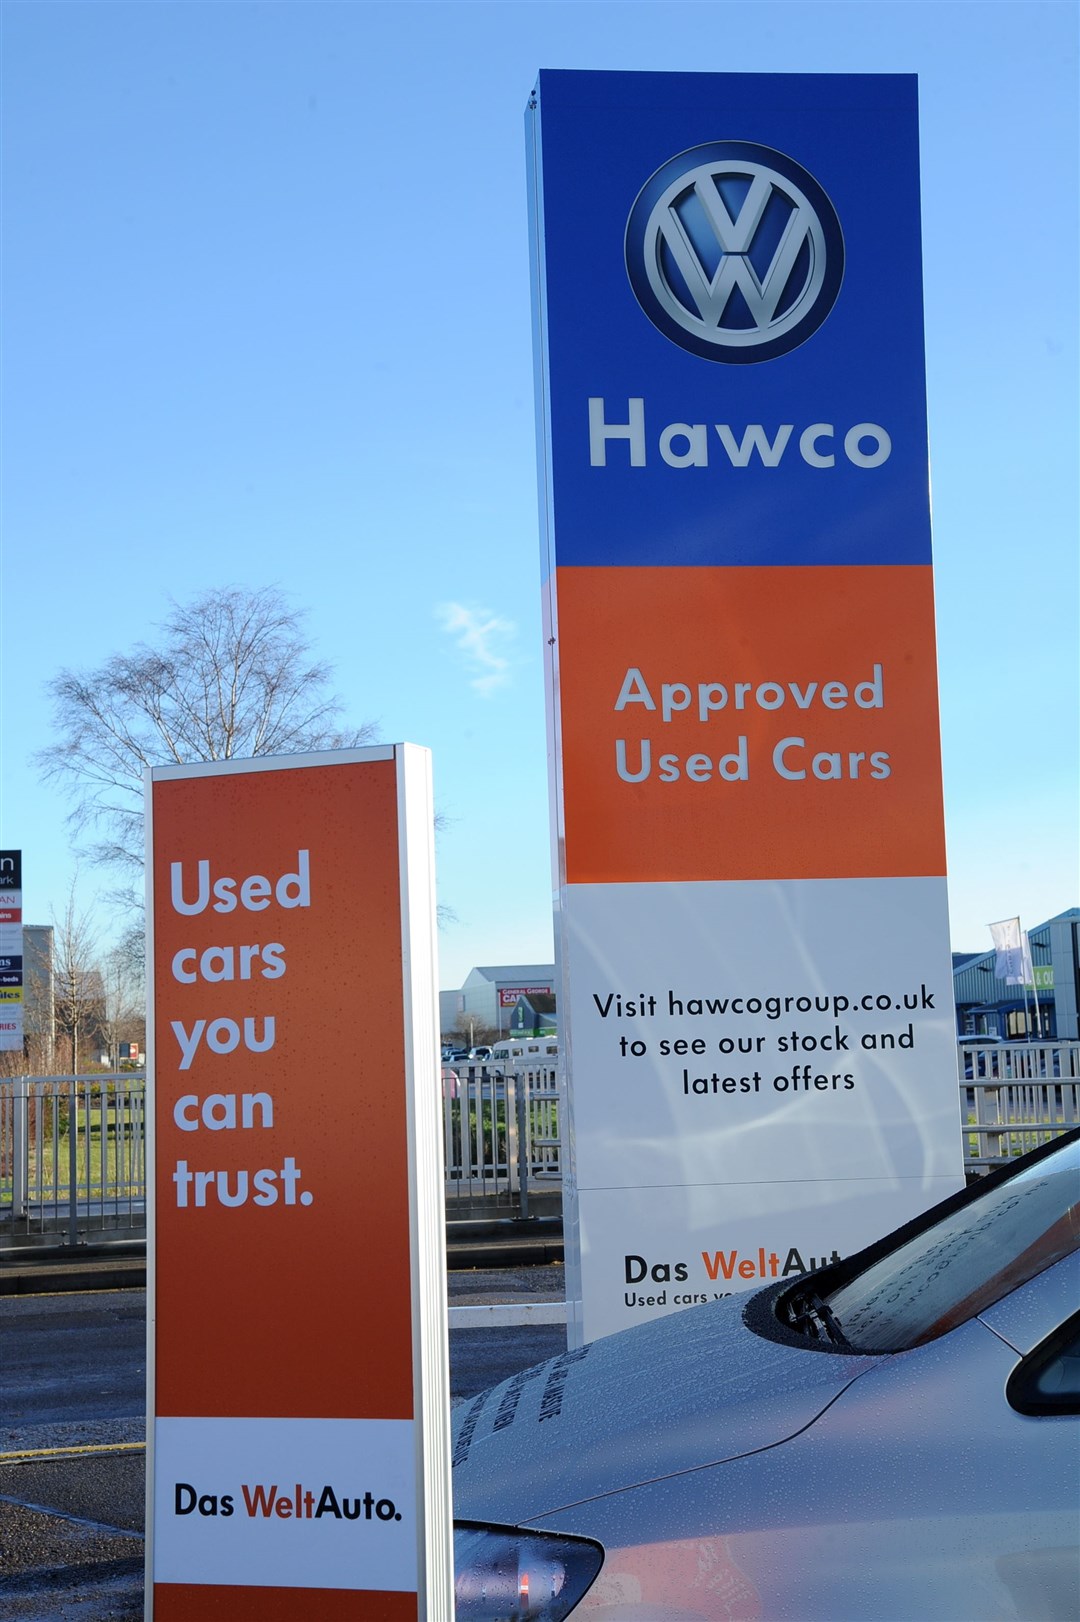 Hawco is optimistic it will return to a break-even position.